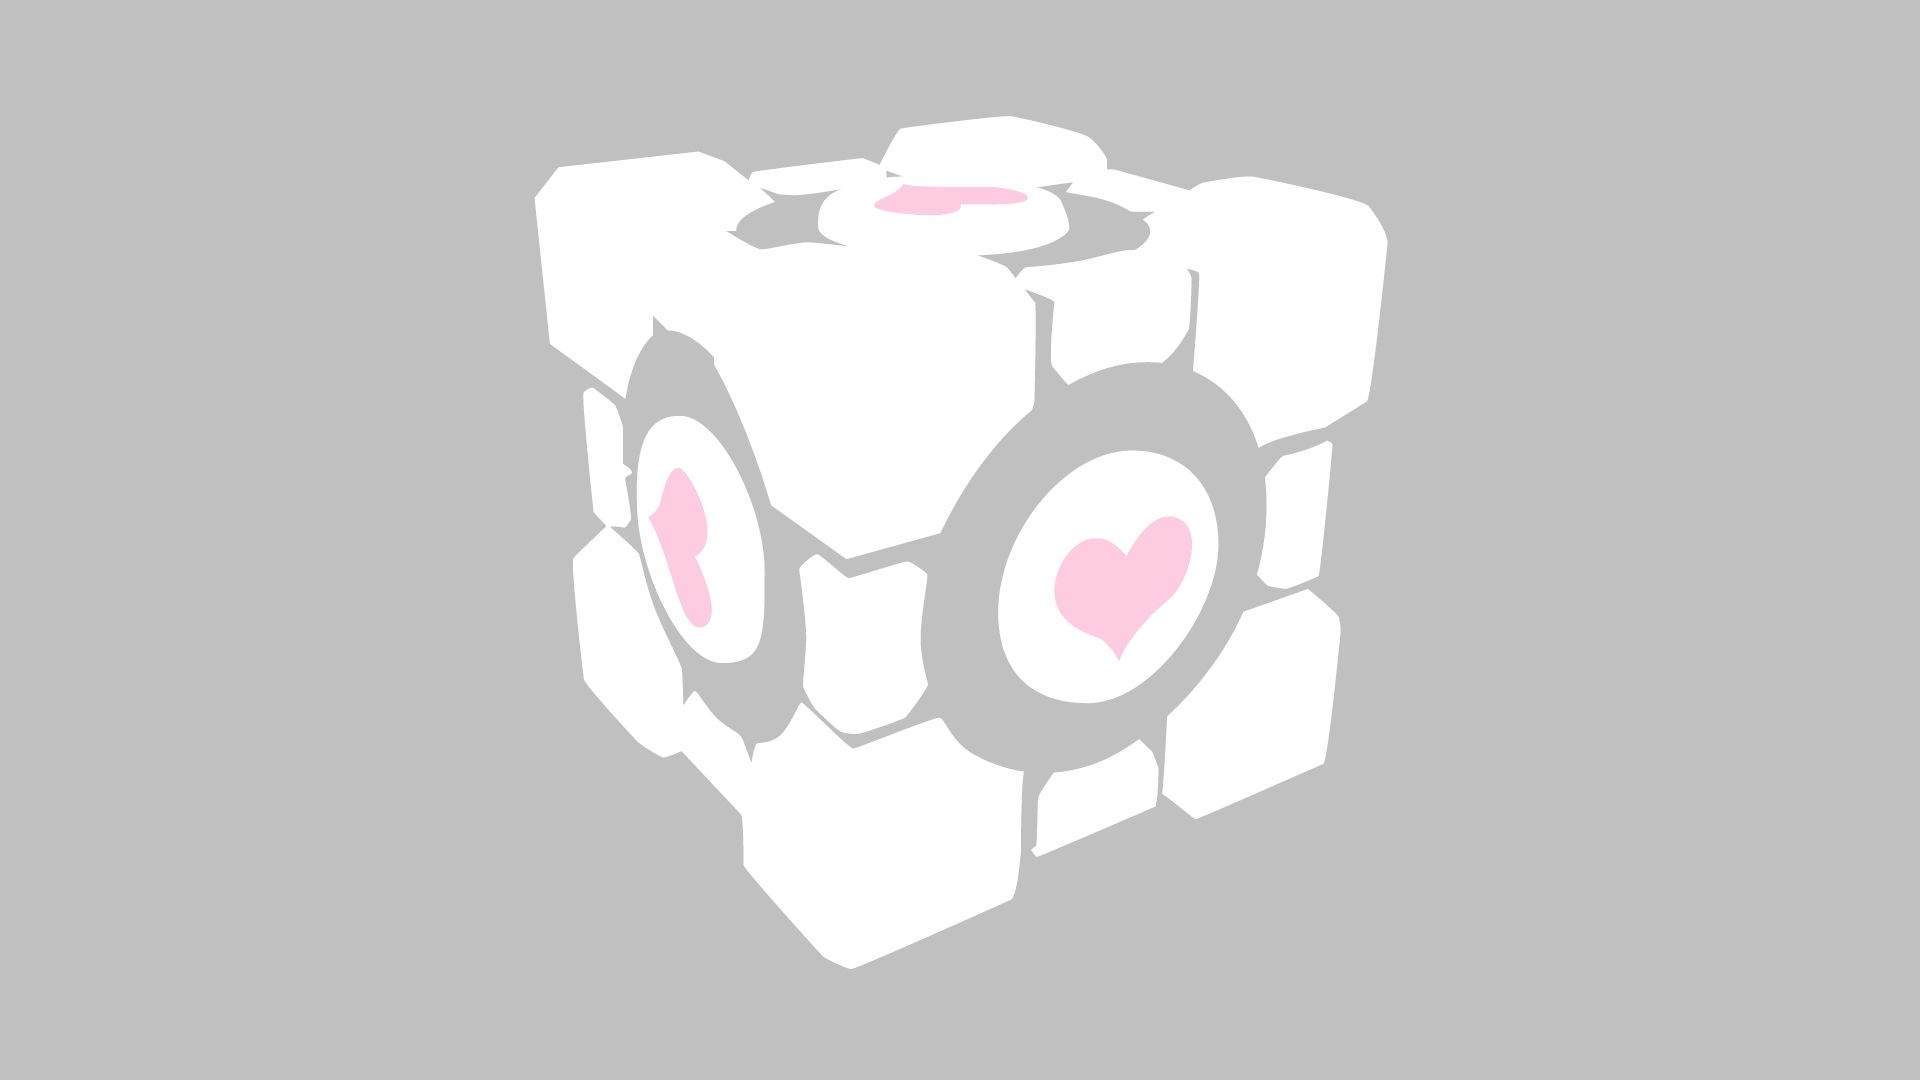 Companion Cube Wallpapers